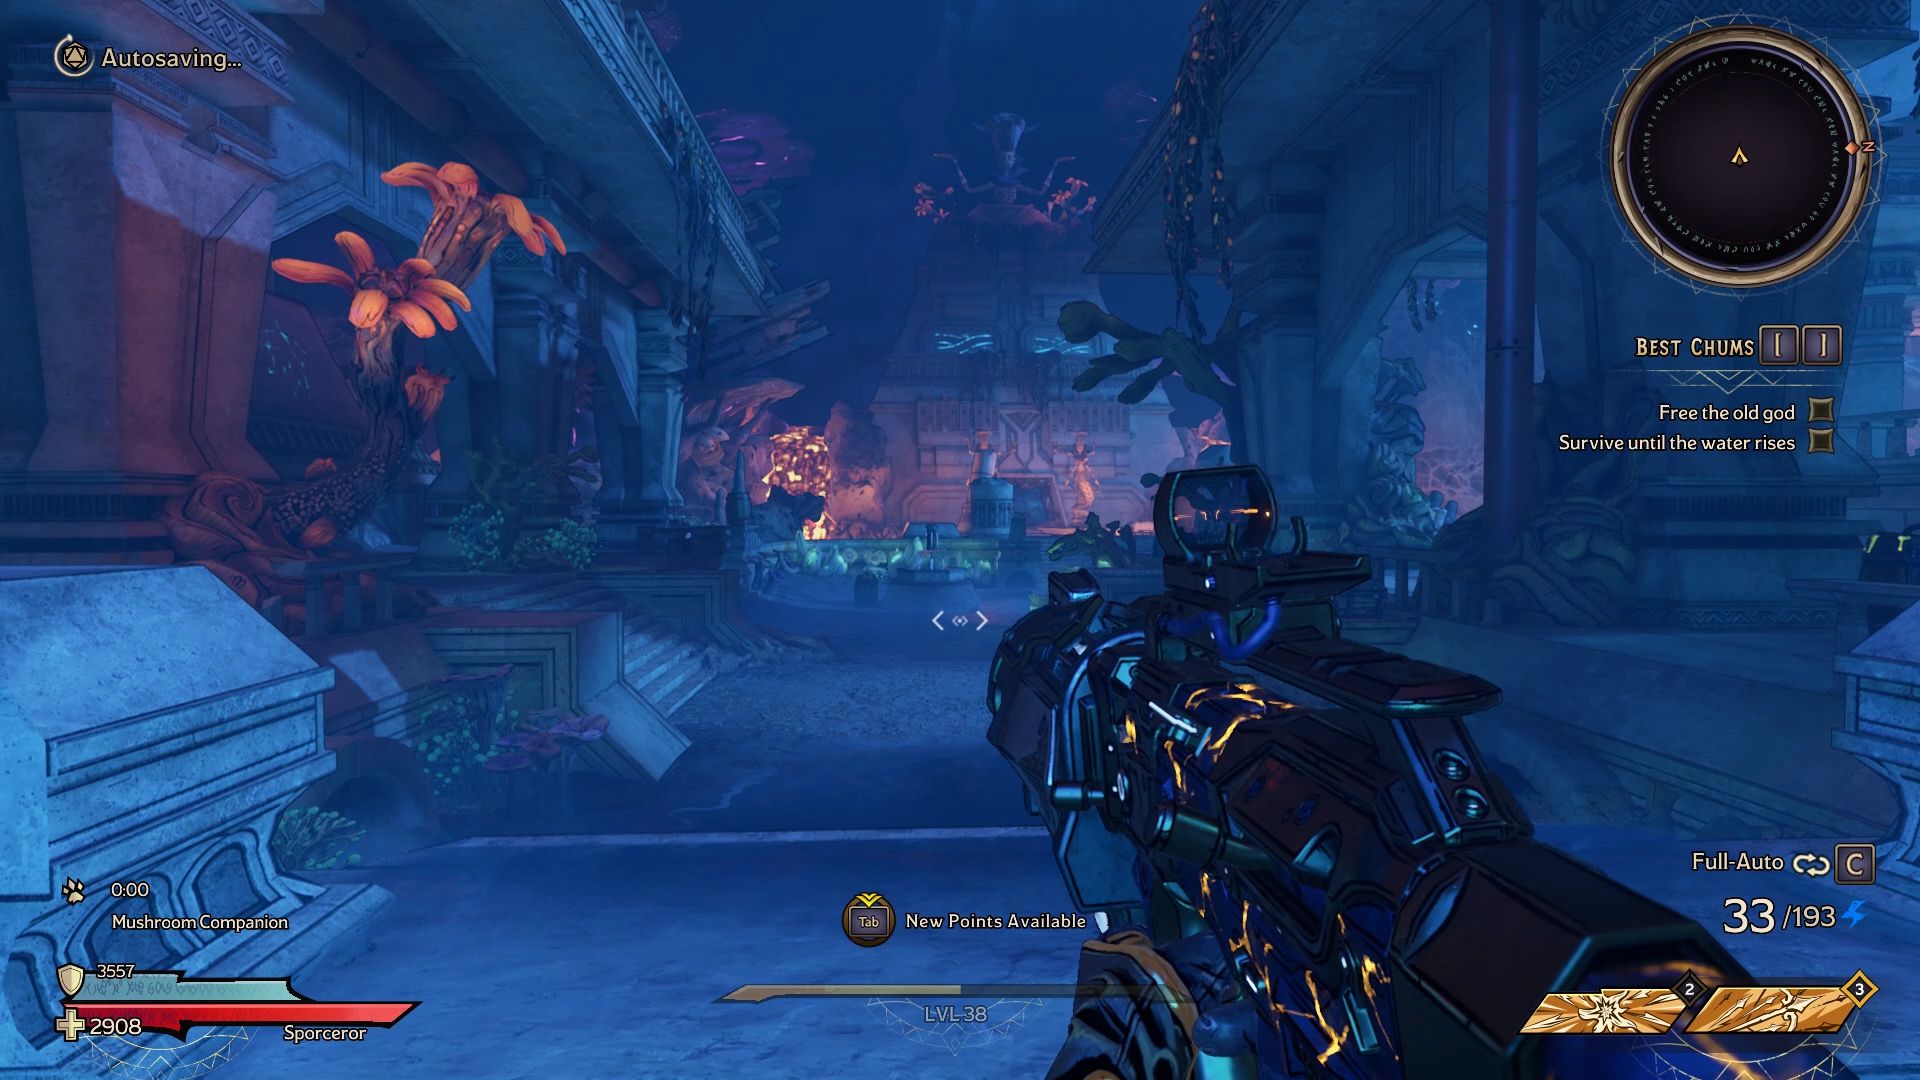 A player looks at a blue, underwater ruins filled with glowing coral and lava